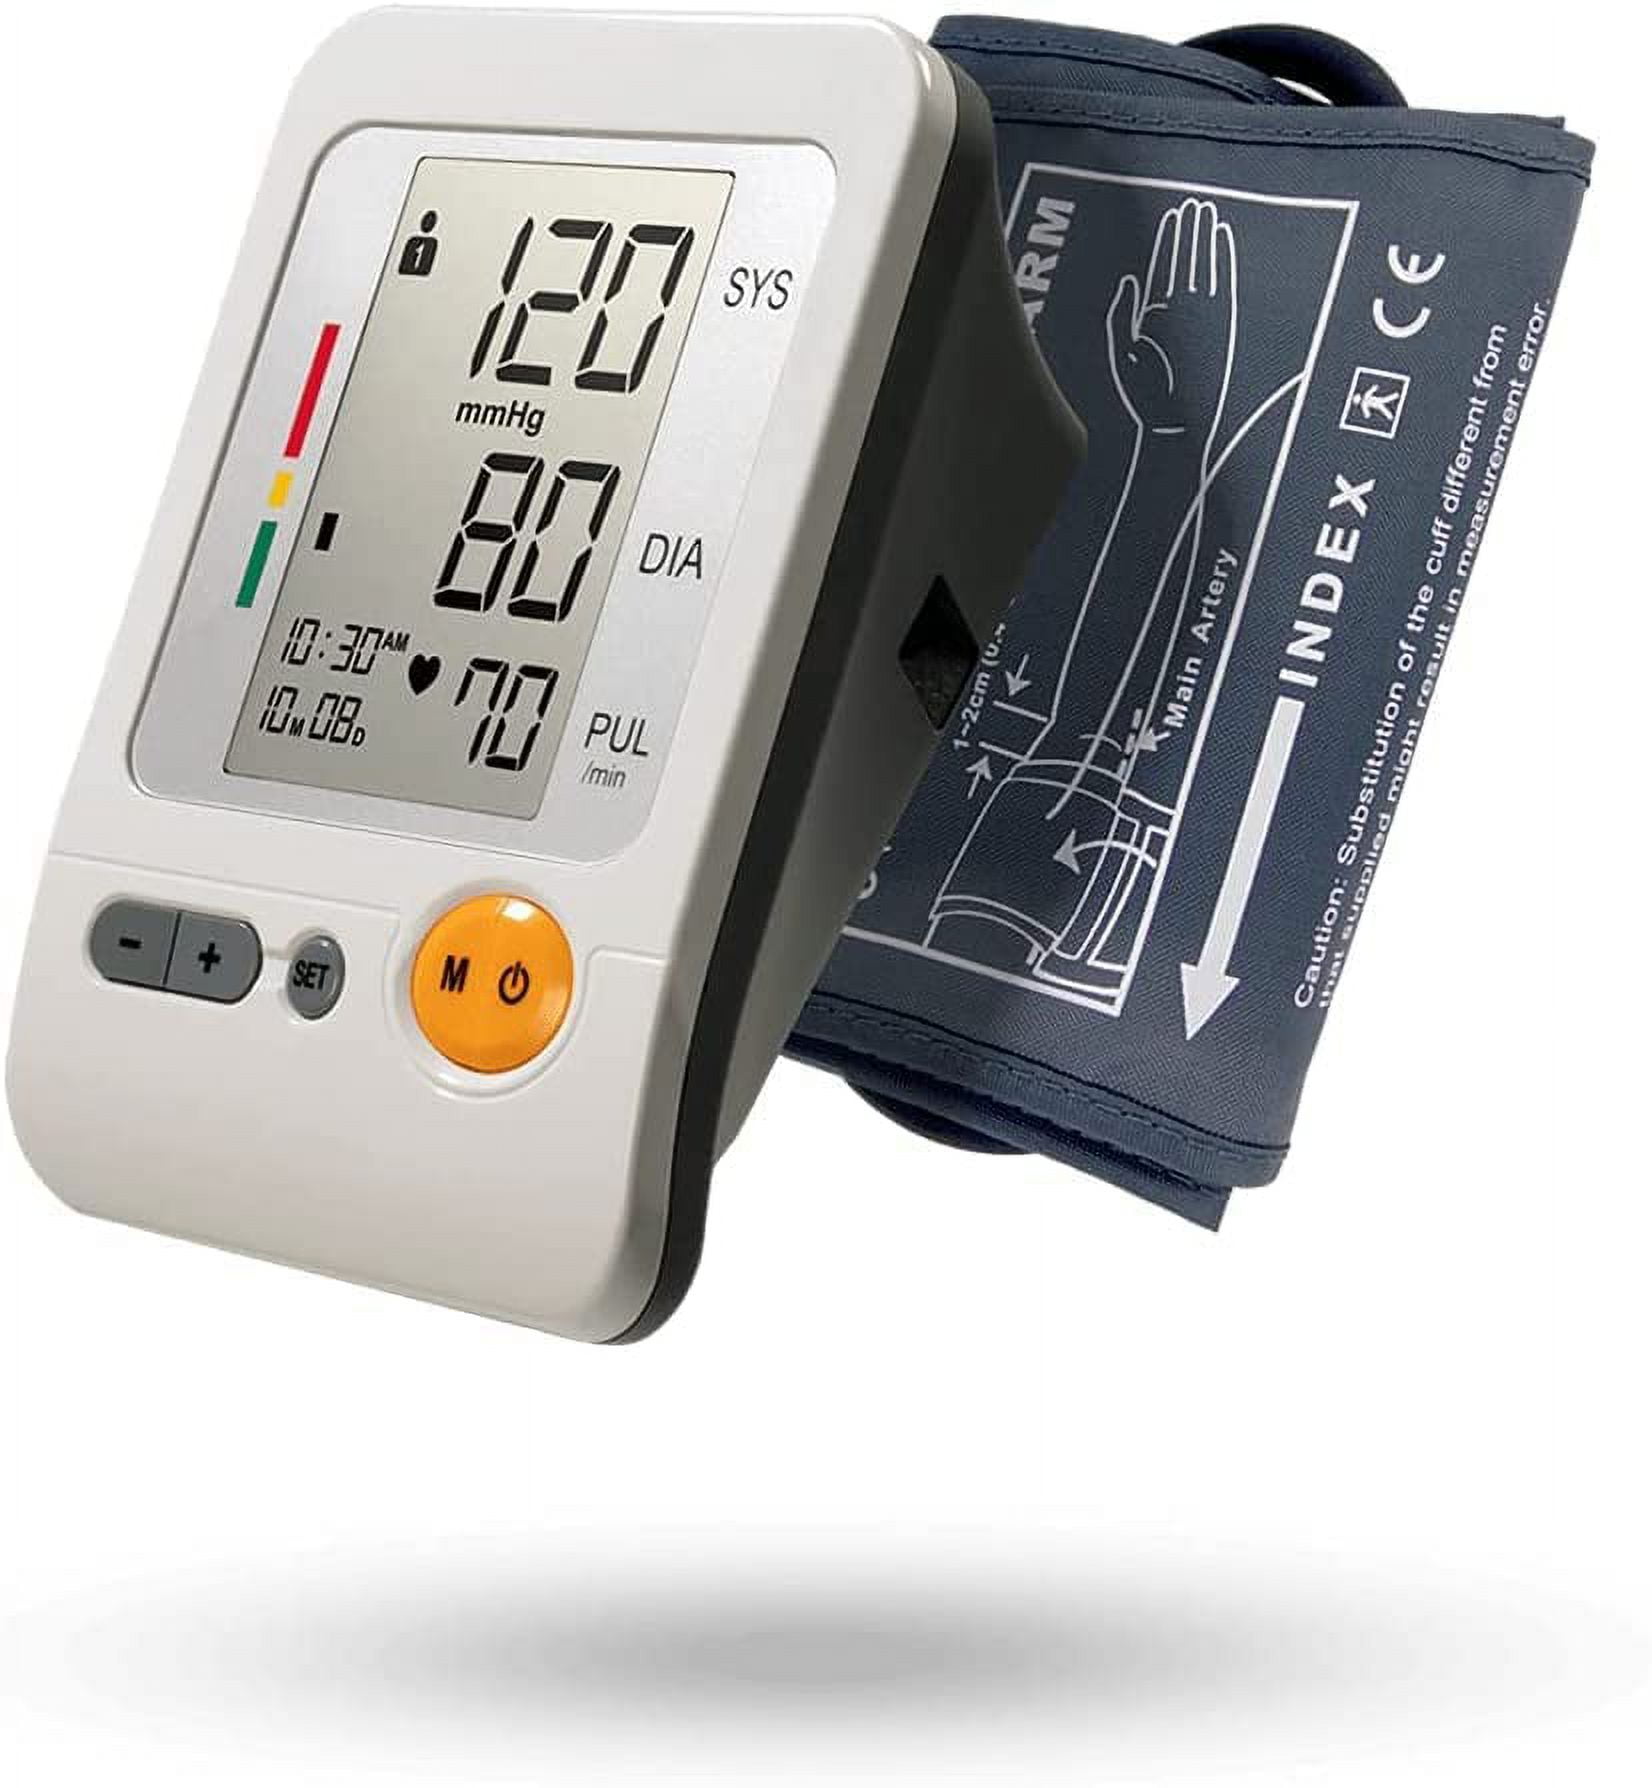 Blood Pressure Monitors - Accurate Monitoring at home - Oxiline